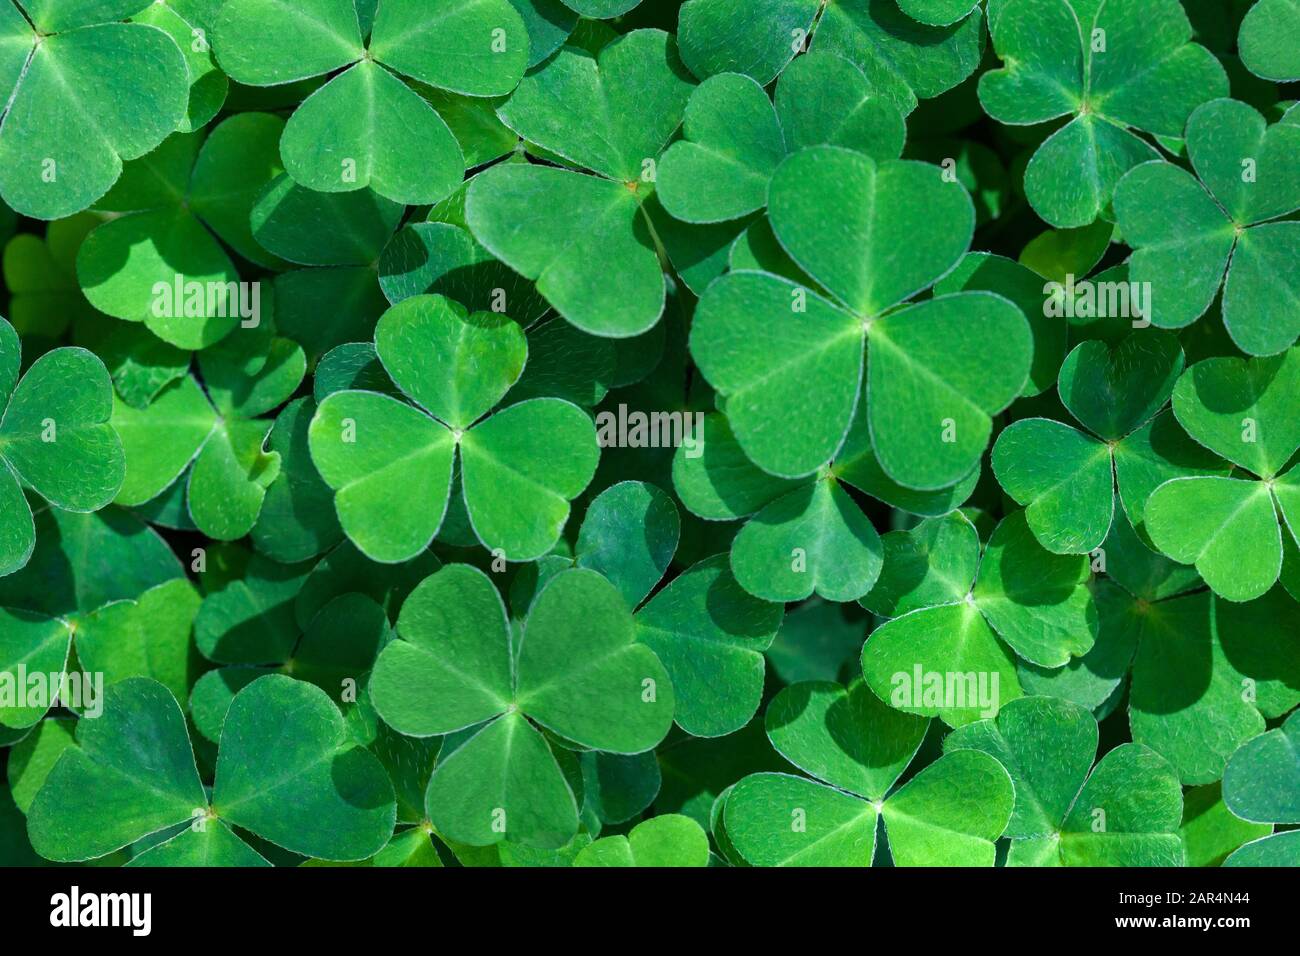 Natural green background with fresh three-leaved shamrocks.  St. Patrick's day holiday symbol.  Top view. Selective focus. Stock Photo